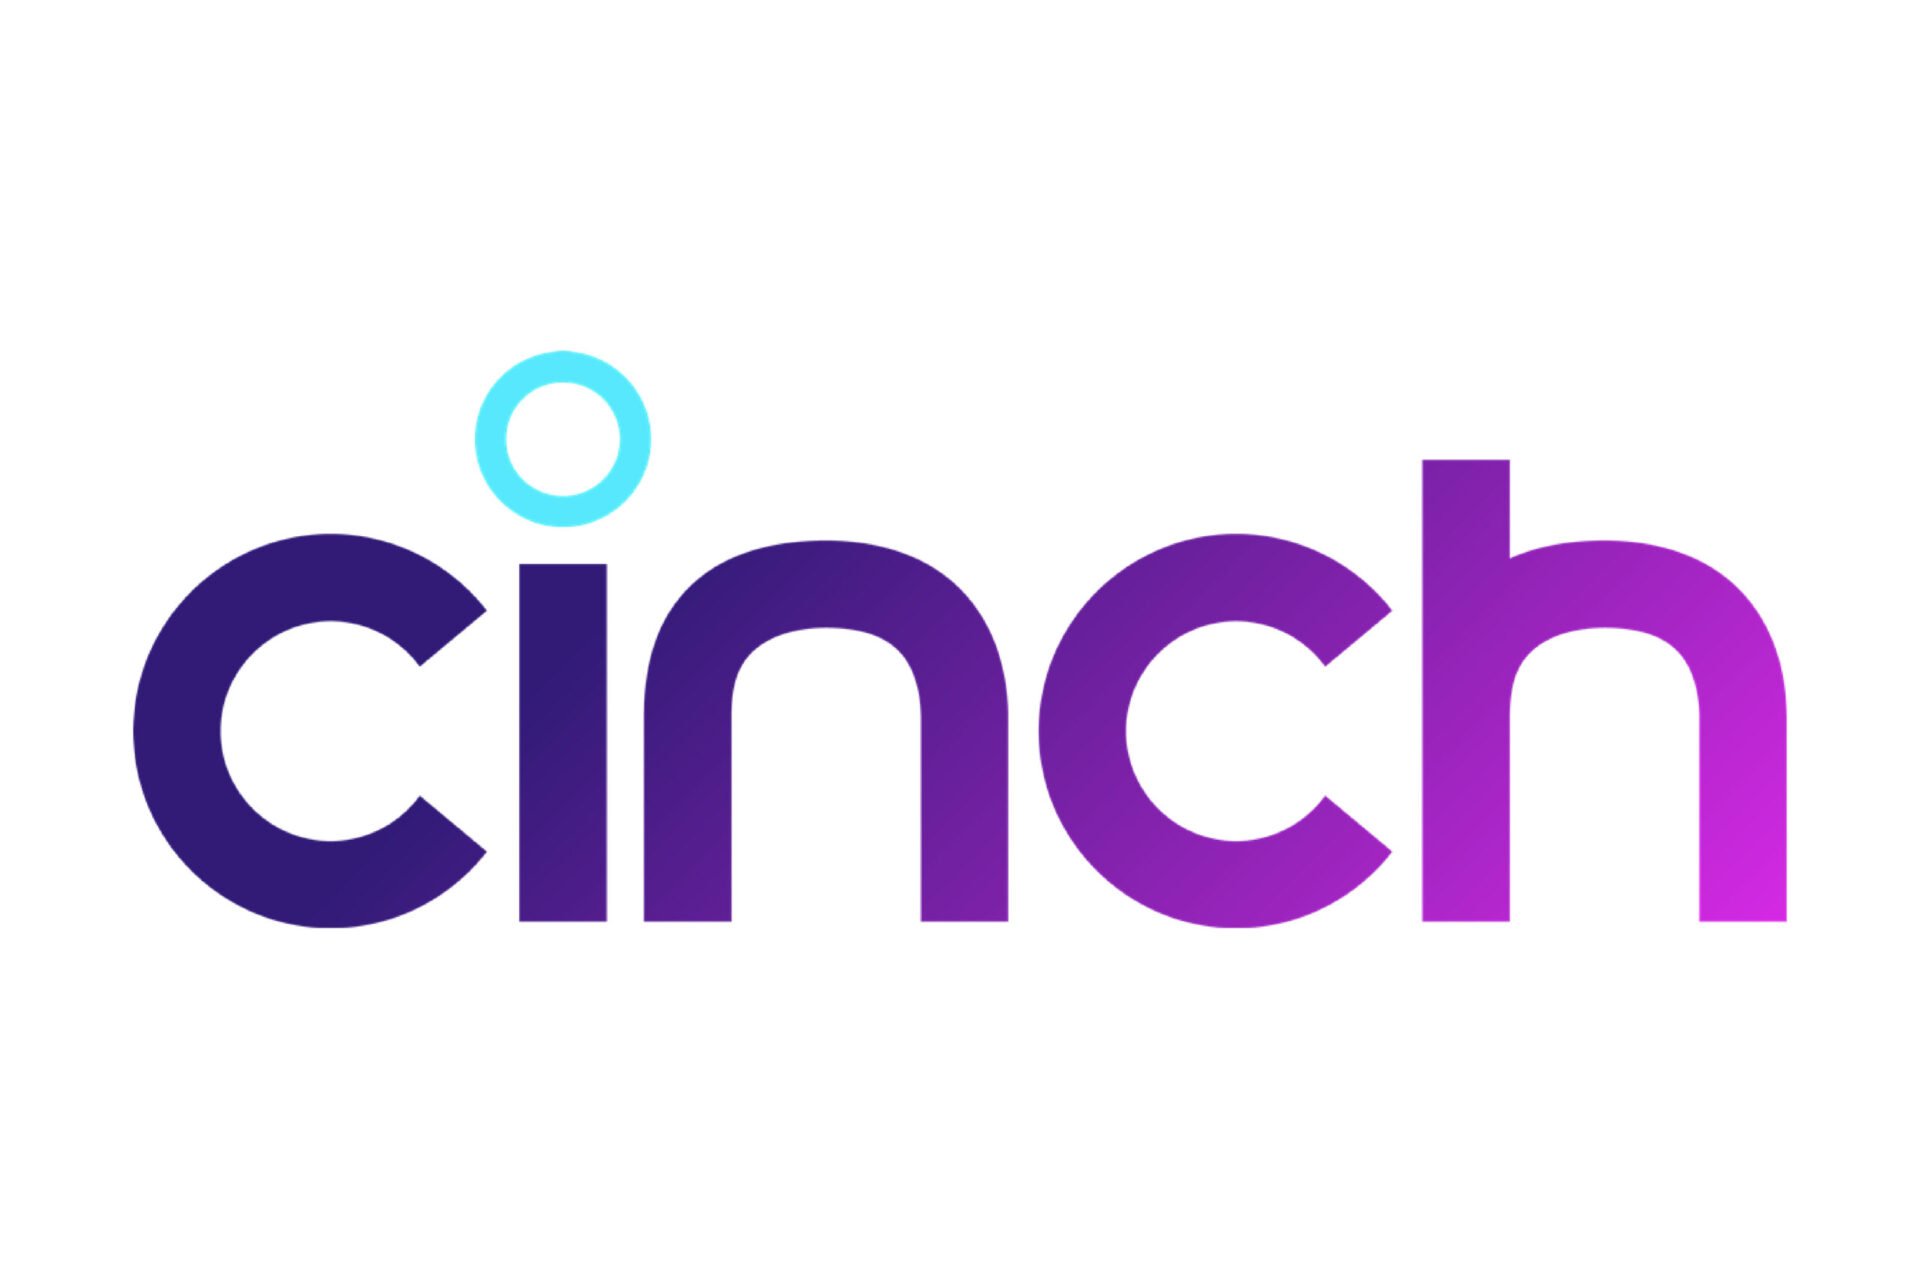 cinch raises £1bn to accelerate growth across UK and Europe - ChannelX